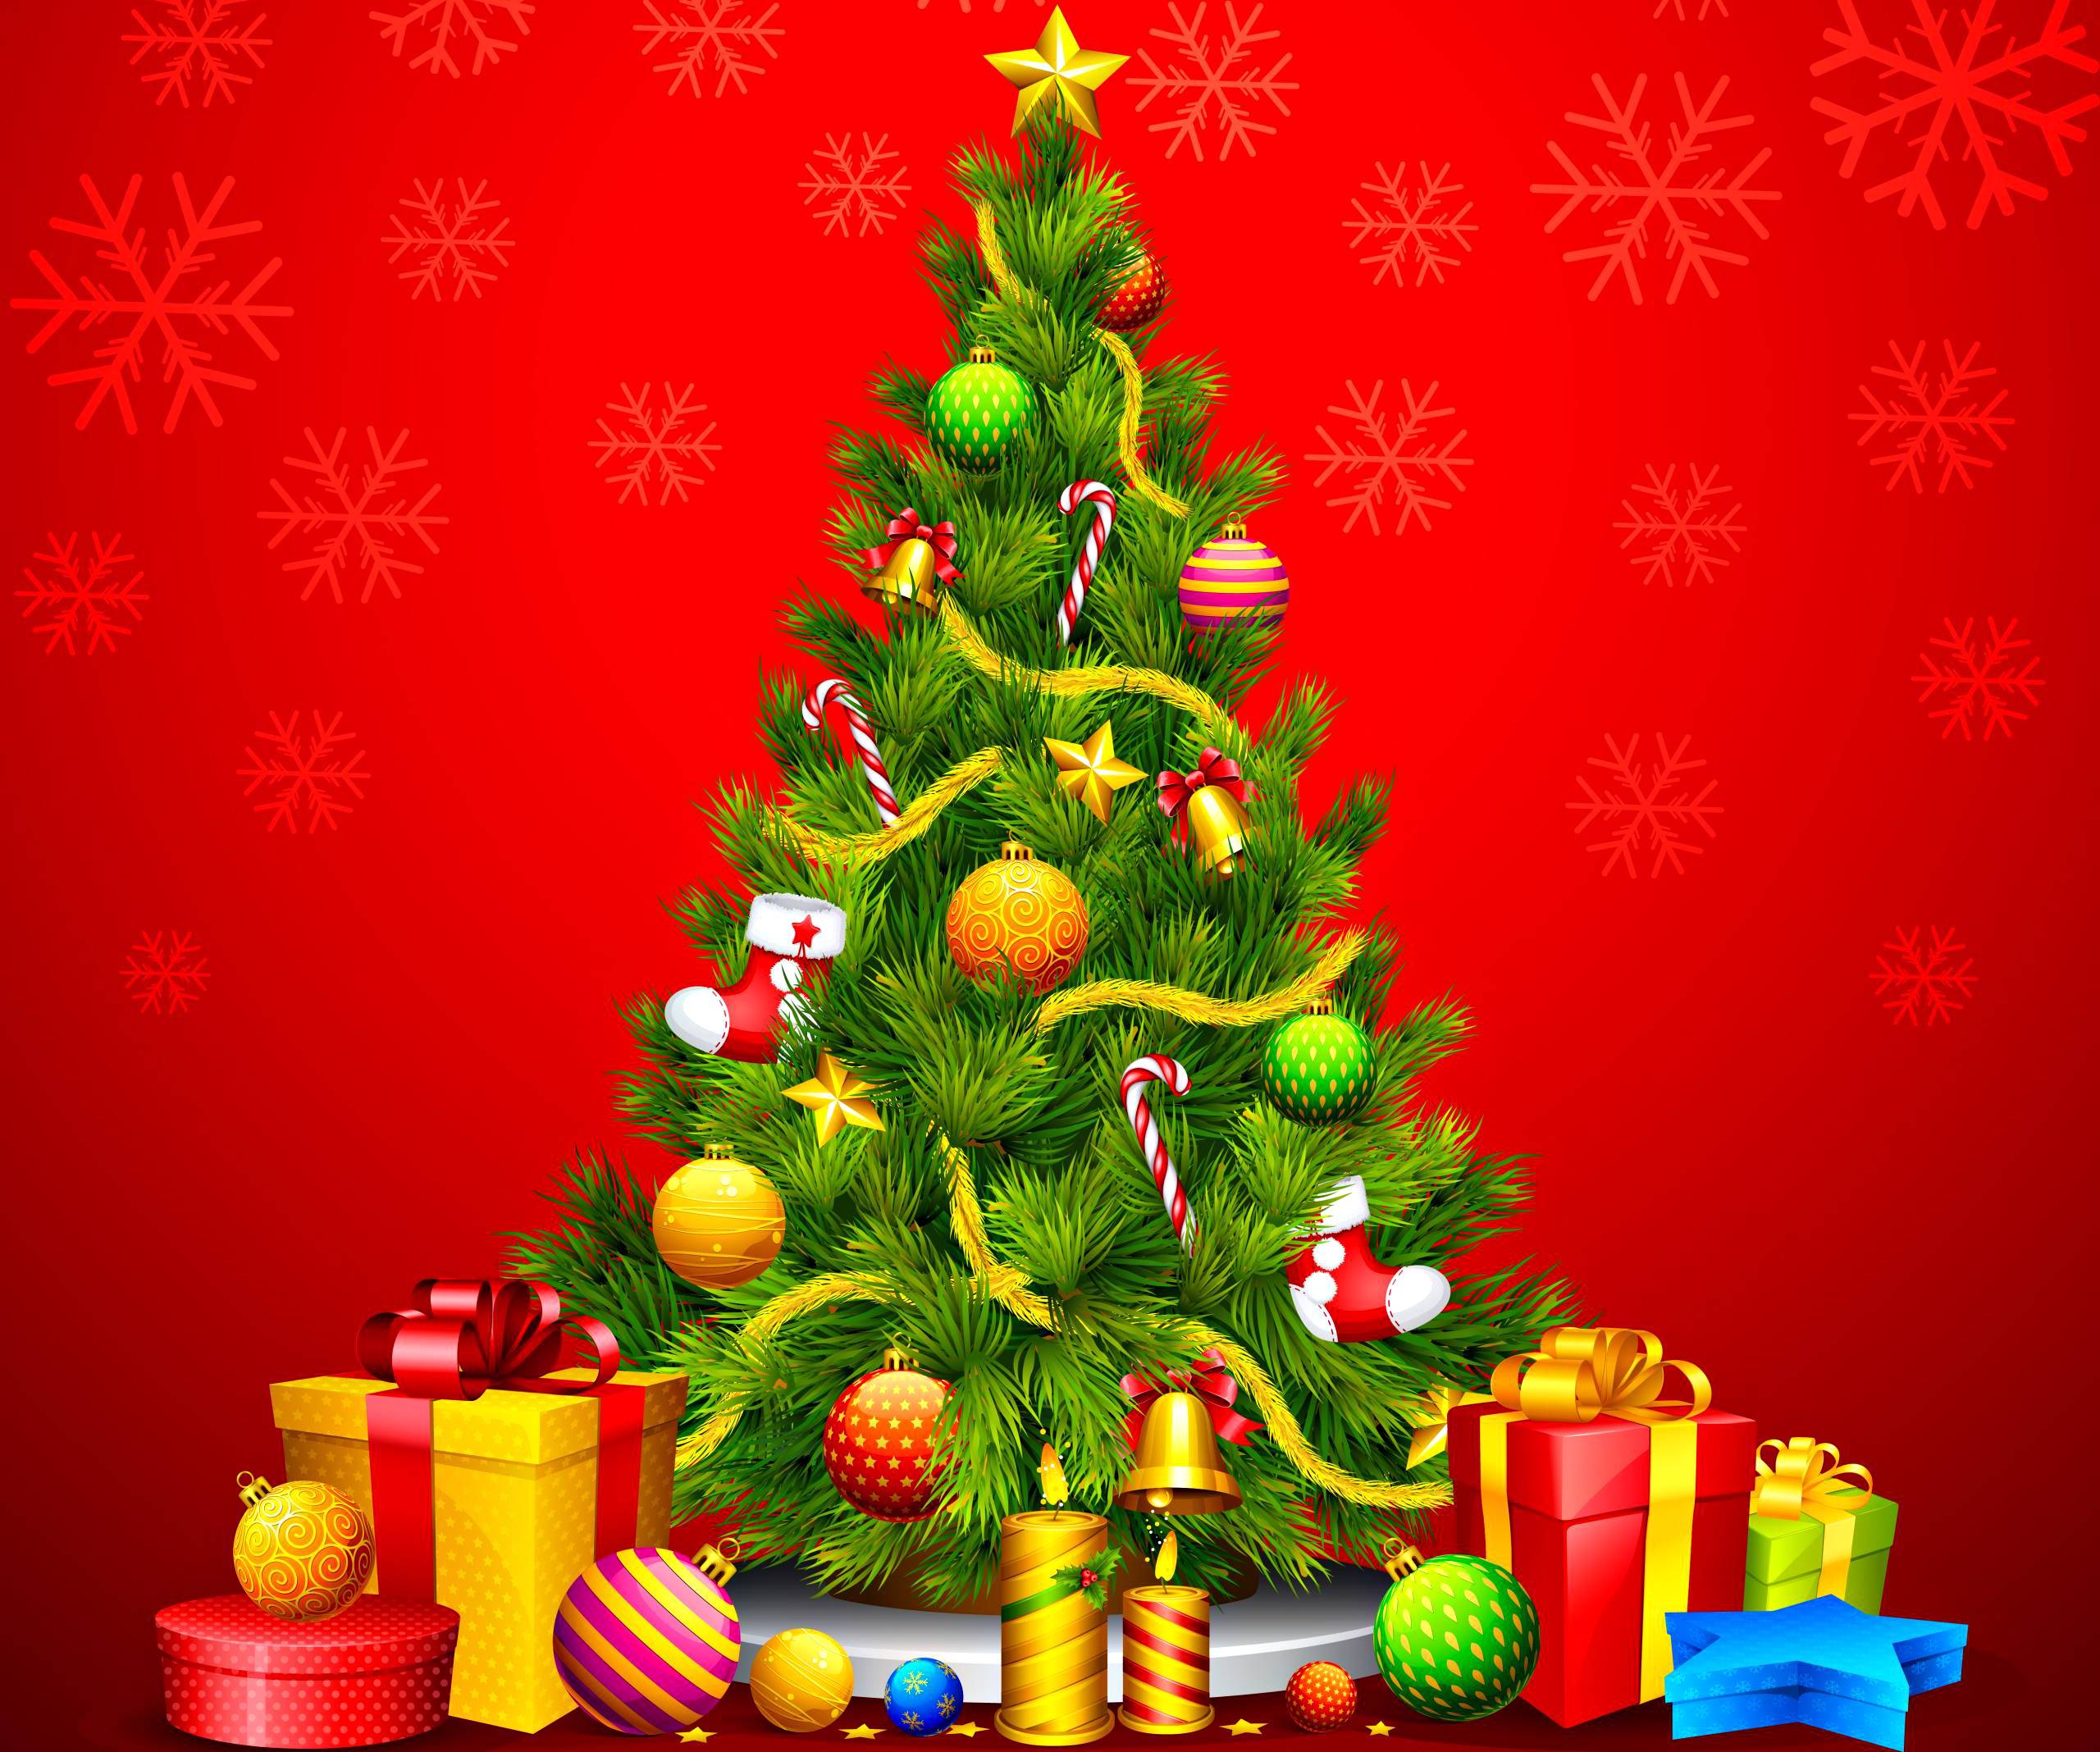 Christmas Tree Wallpaper Backgrounds